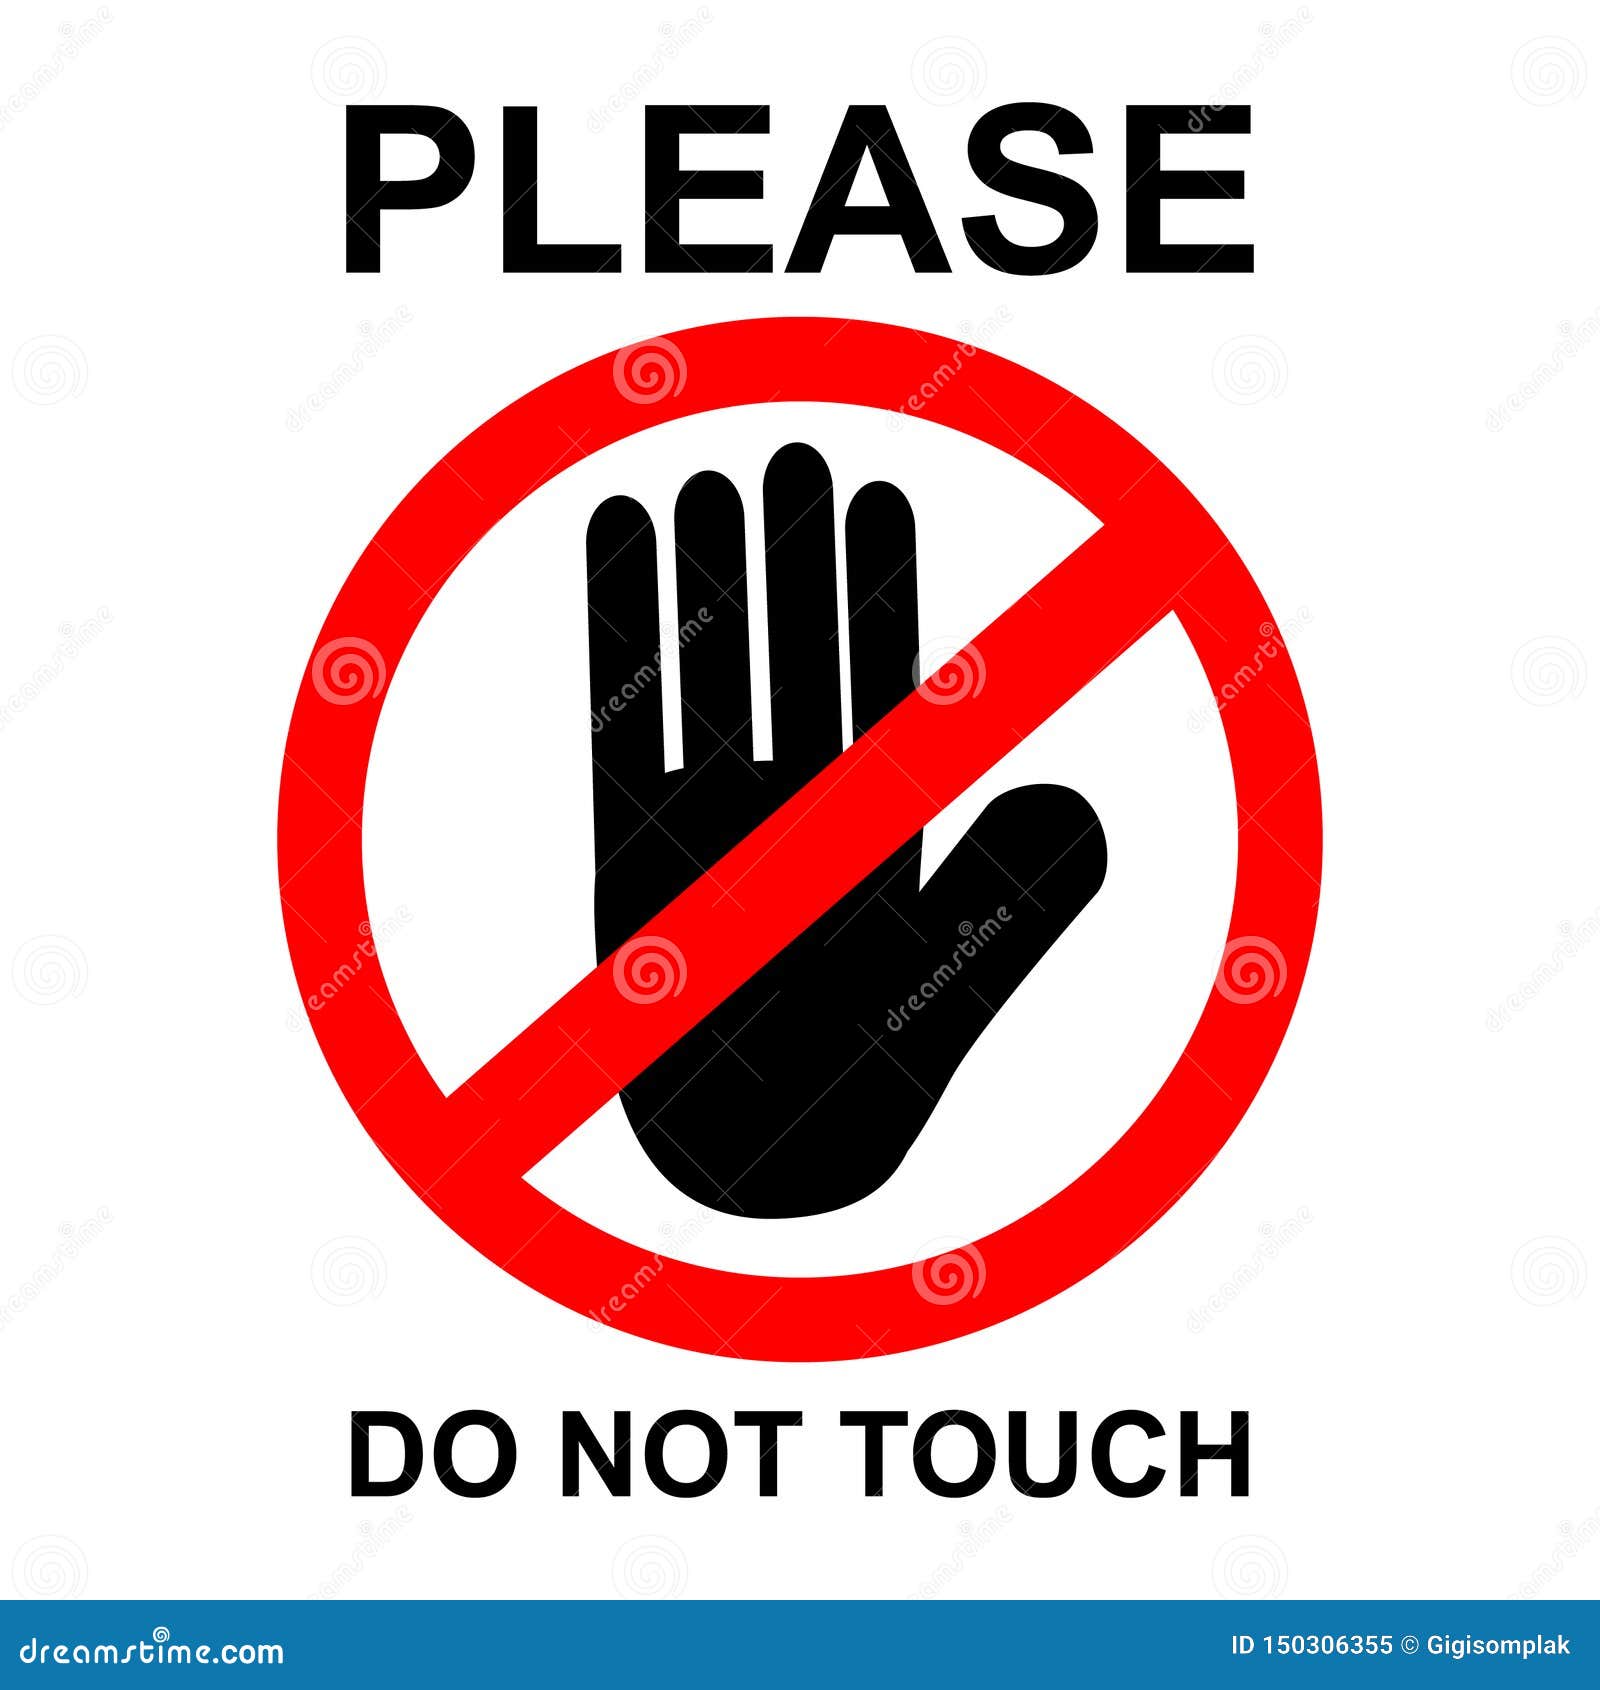 don-t-touch-please-sign-no-entry-sign-prohibition-symbol-isolated-on